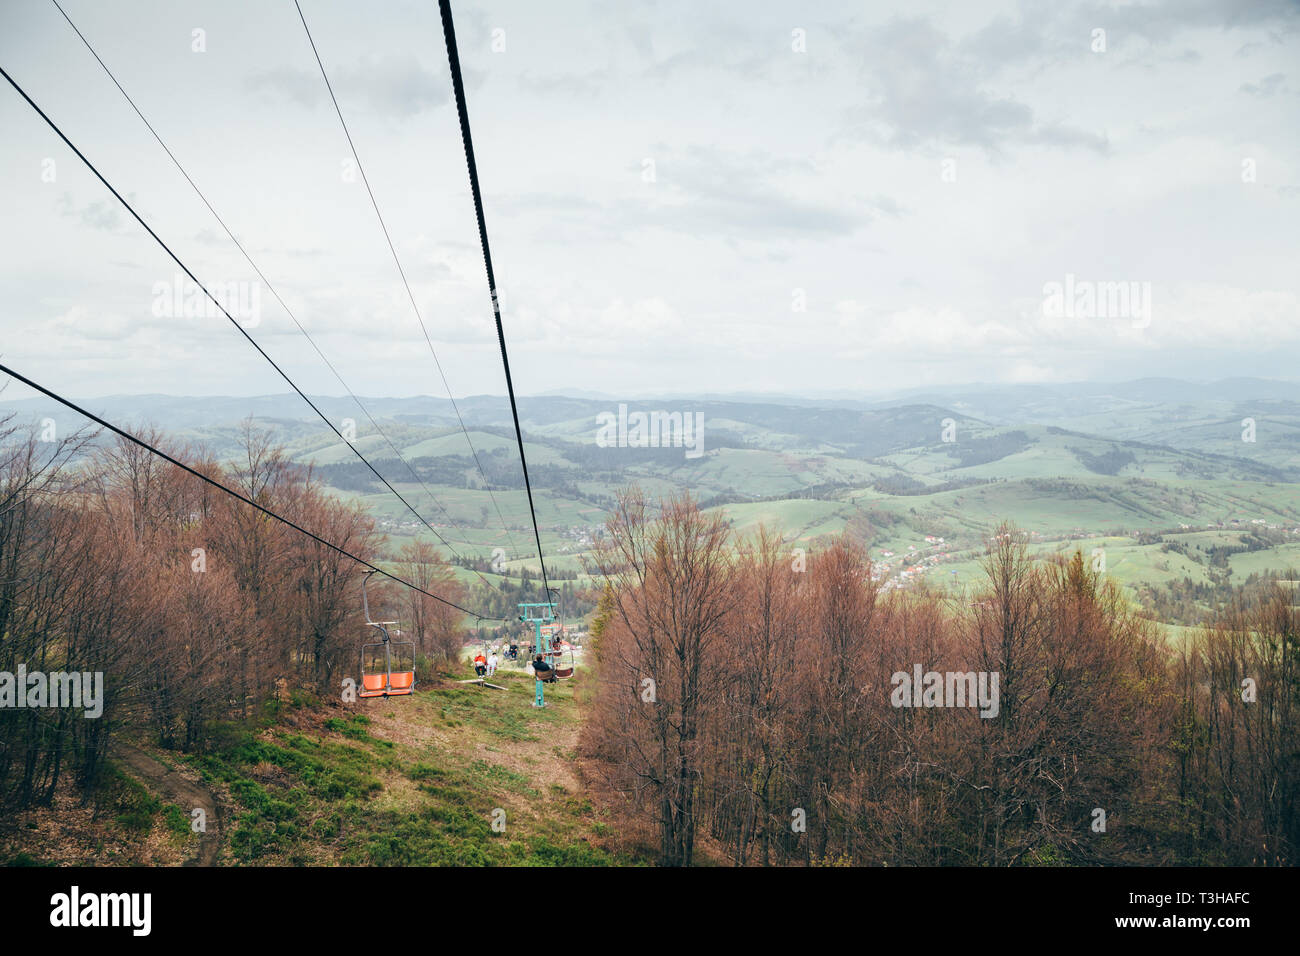 A view from a cablecar, cableway at mountains surrounded by forest going down to the meadow Stock Photo